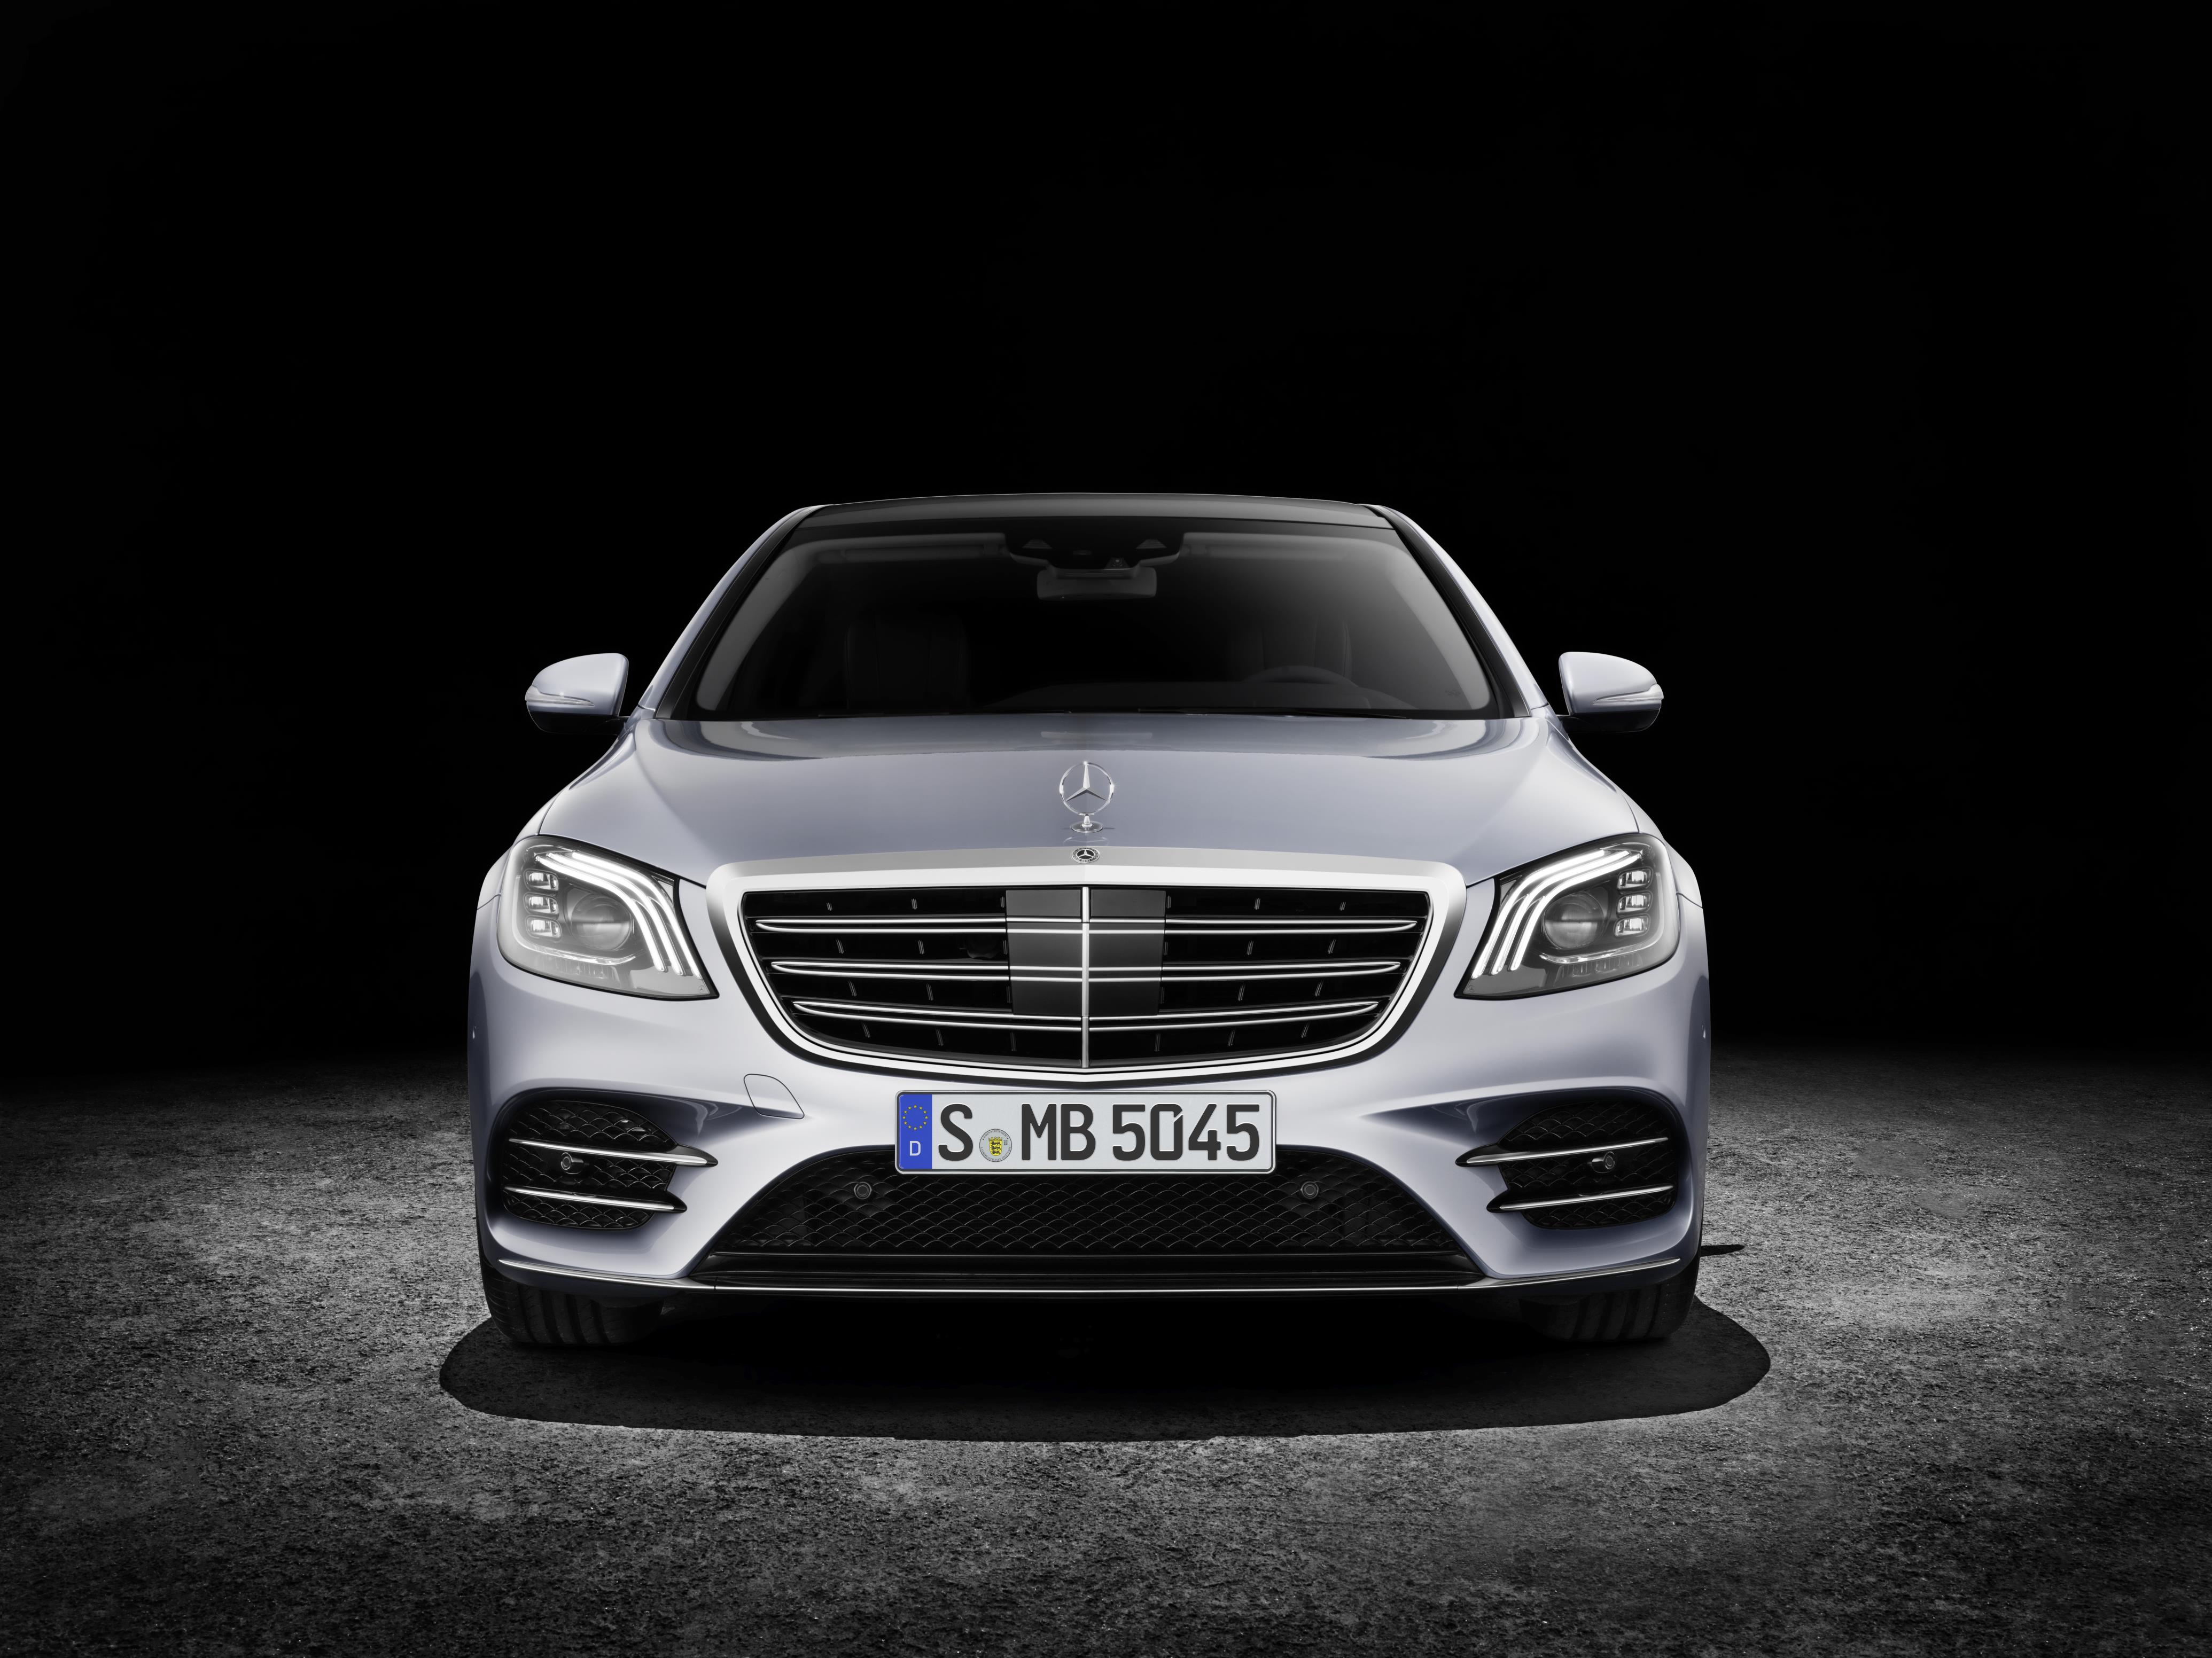 Mercedes S-Class Hybrid (W222) accessories specifications